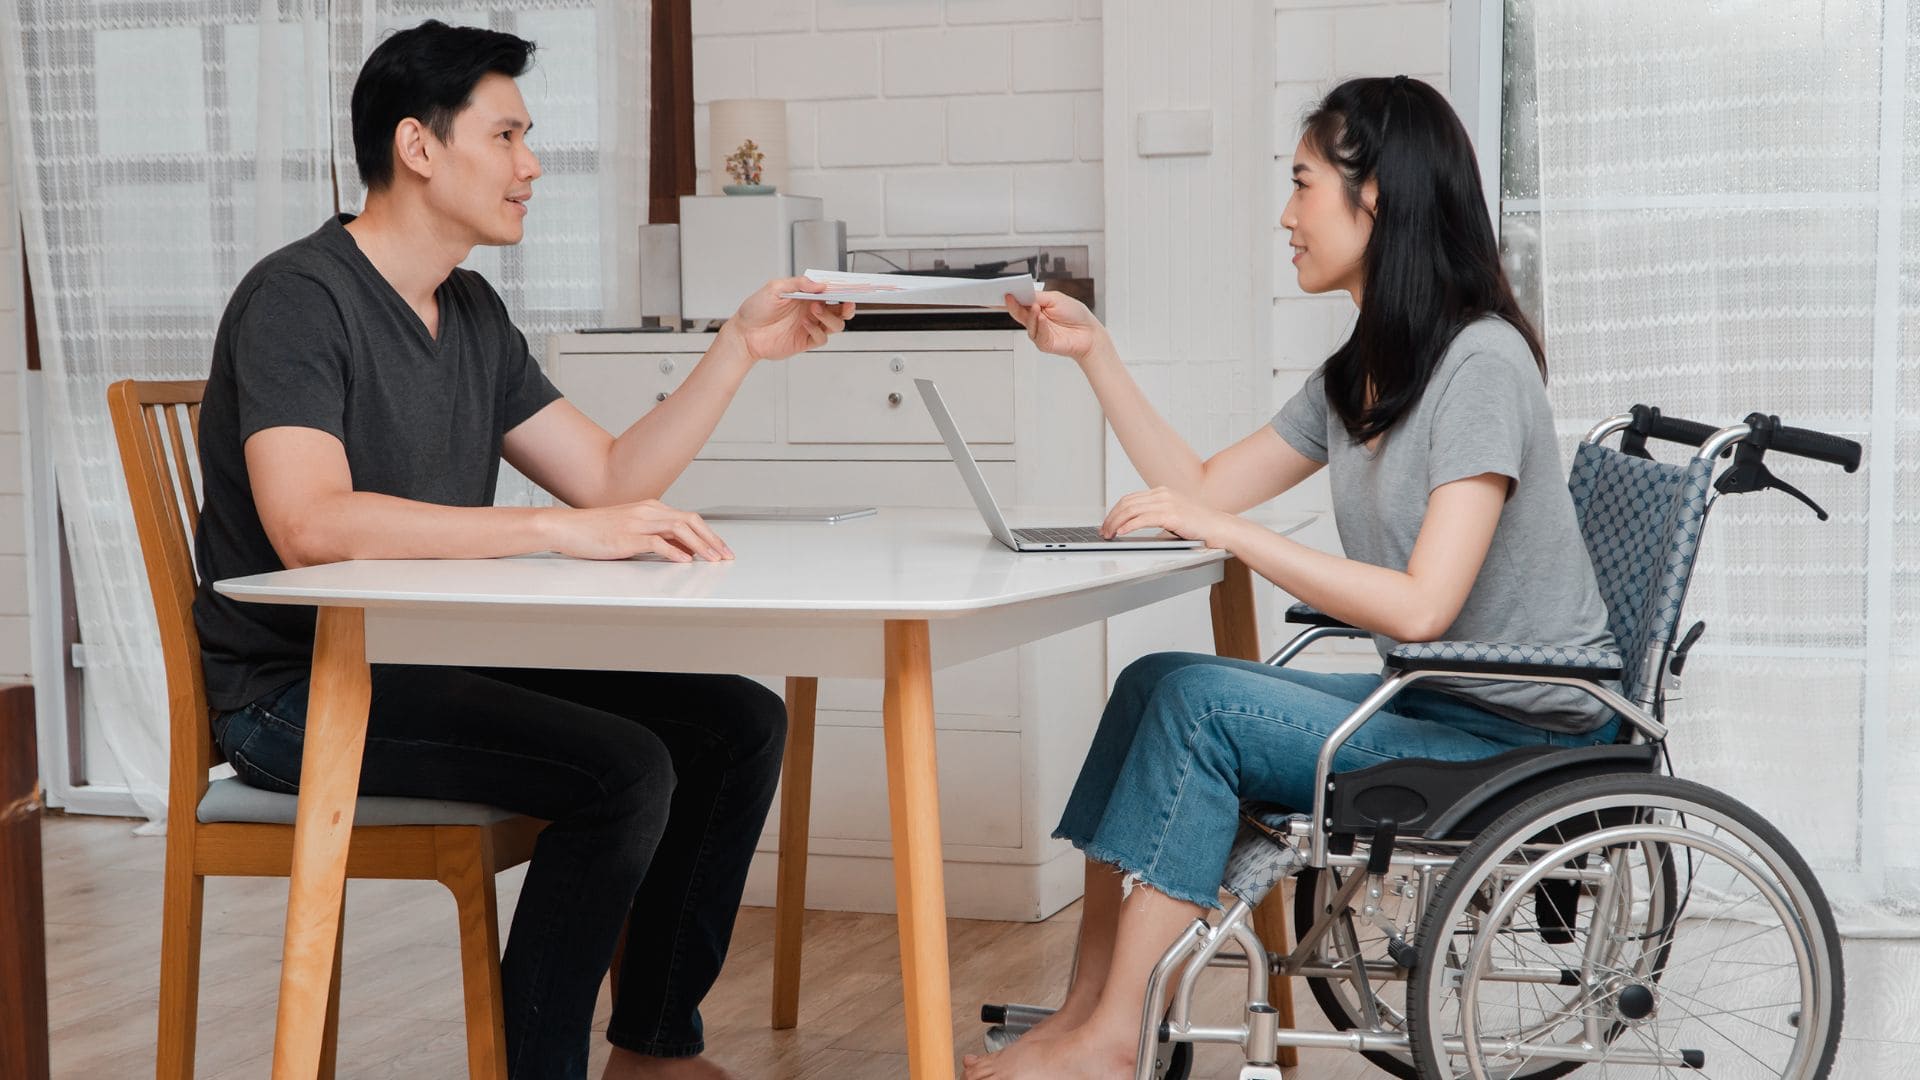 Disability beneficiaries could apply for Supplemental Security Income